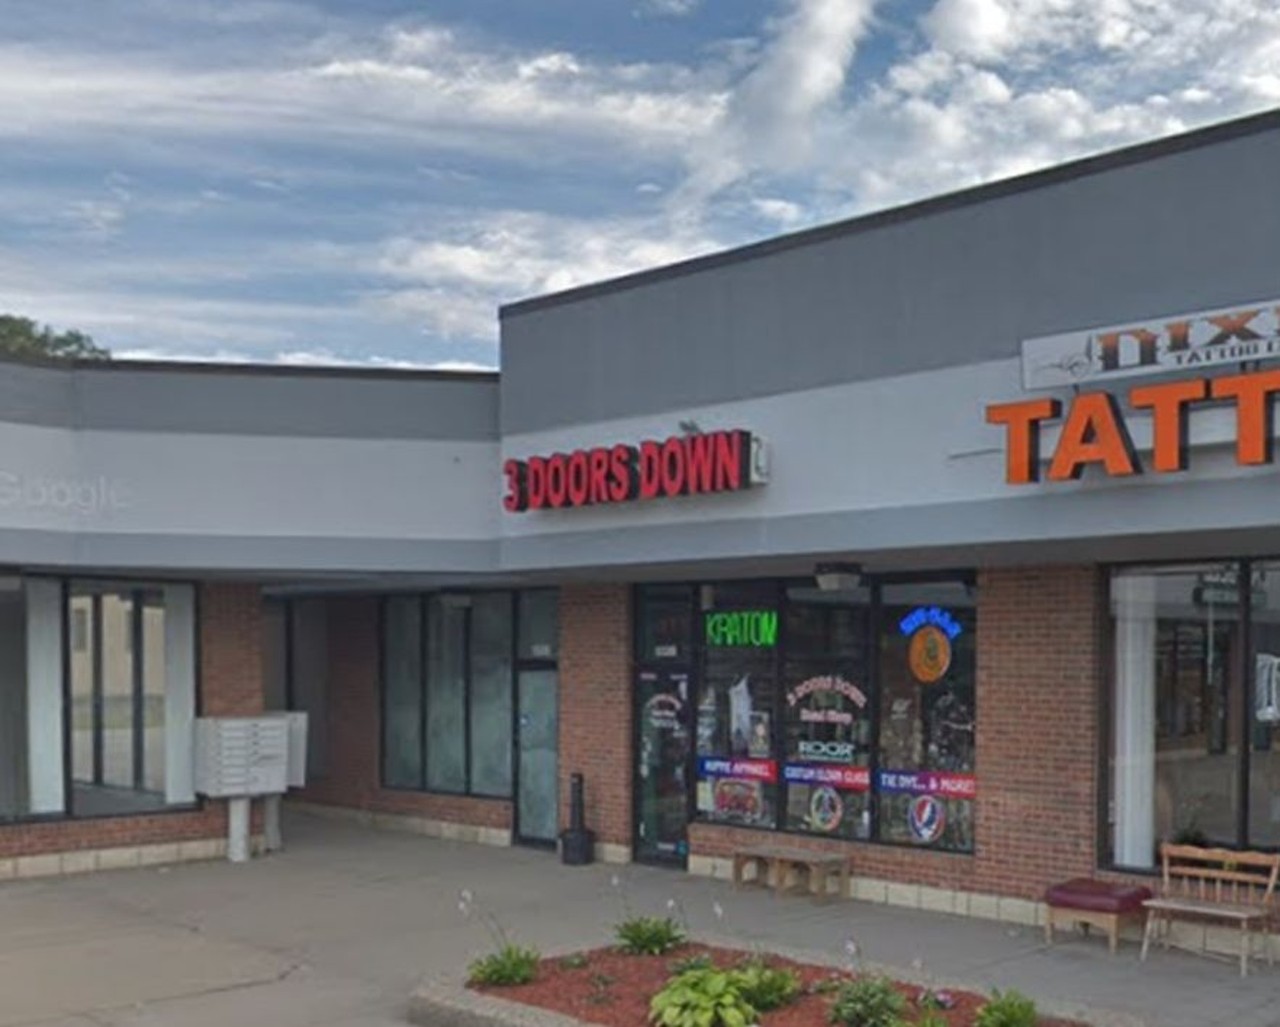 3 Doors Down5326 Dixie Hwy., Waterford Township, (248) 618 35543 Doors Down has three locations throughout Michigan including Waterford, Bay City, and Traverse City &#151; so you&#146;re never too far from one of the largest selections of smoking supplies, apparel, and accessories. 
&nbsp;Photo via GoogleMaps